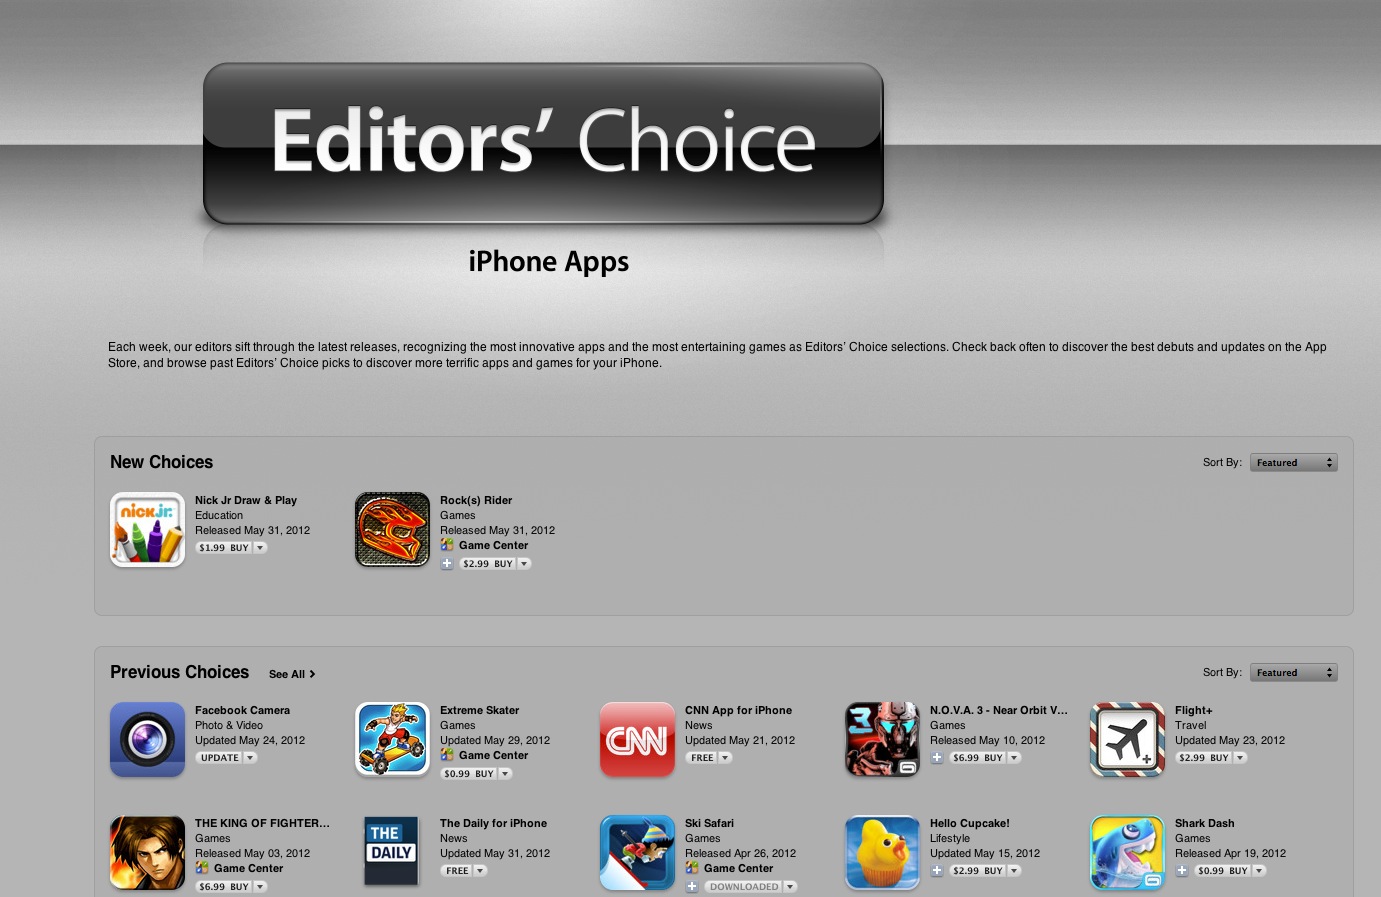 36 Top Photos Popular Game Apps In 2012 - Best Iphone Apps Of 2012